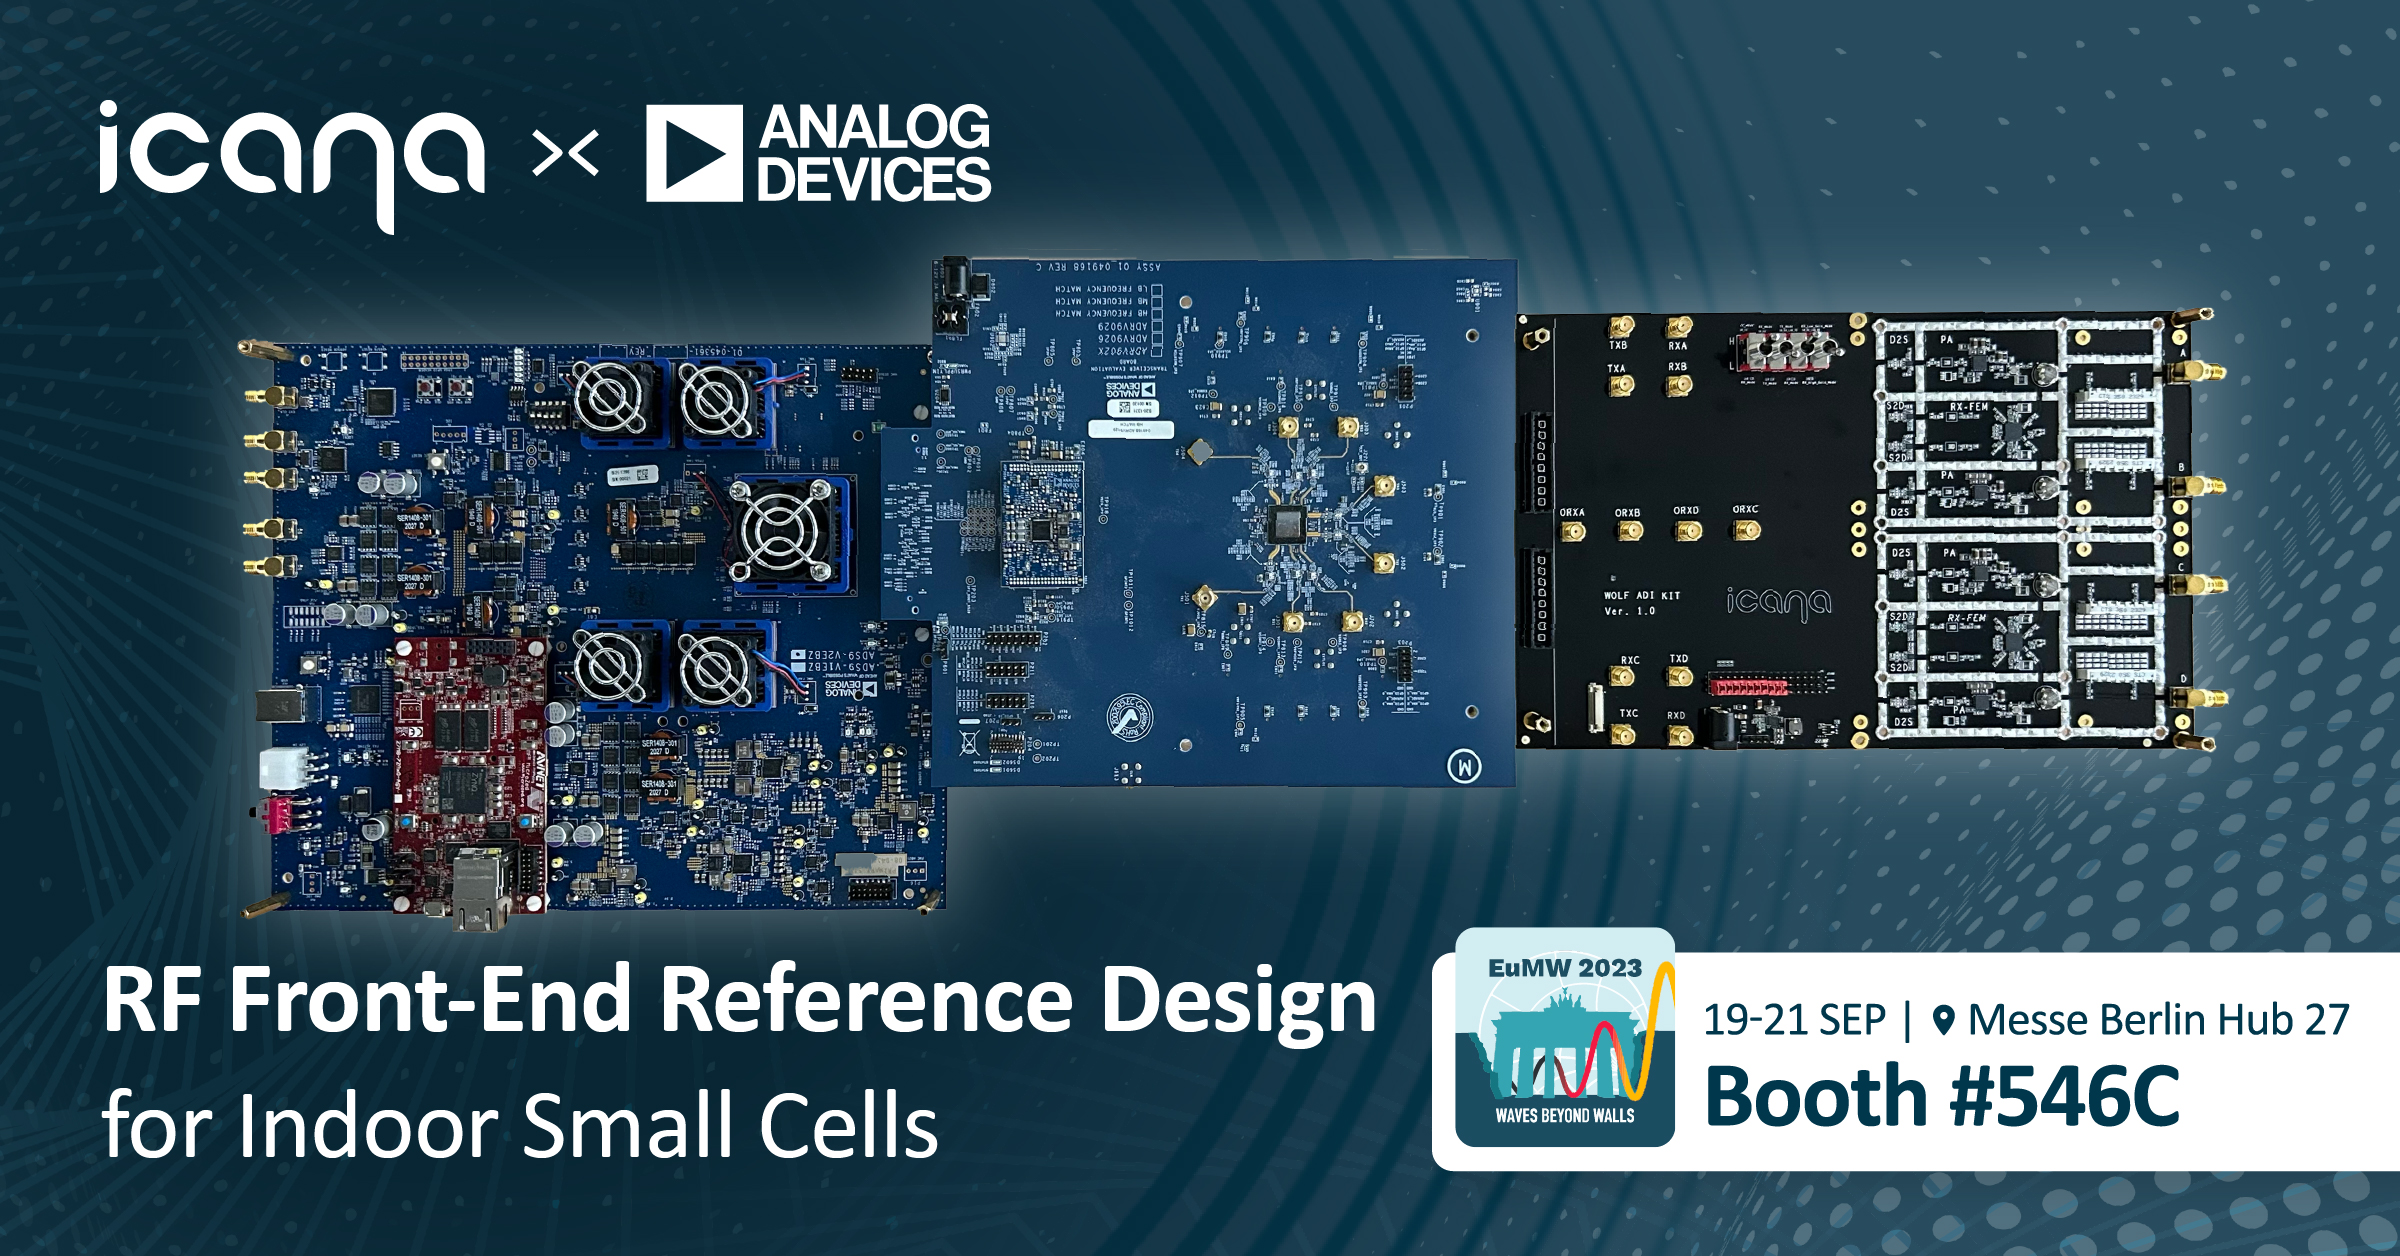 iCana launches RF front-end reference design with Analog Devices ADRV9029 RF Transceiver Platform for indoor small cells